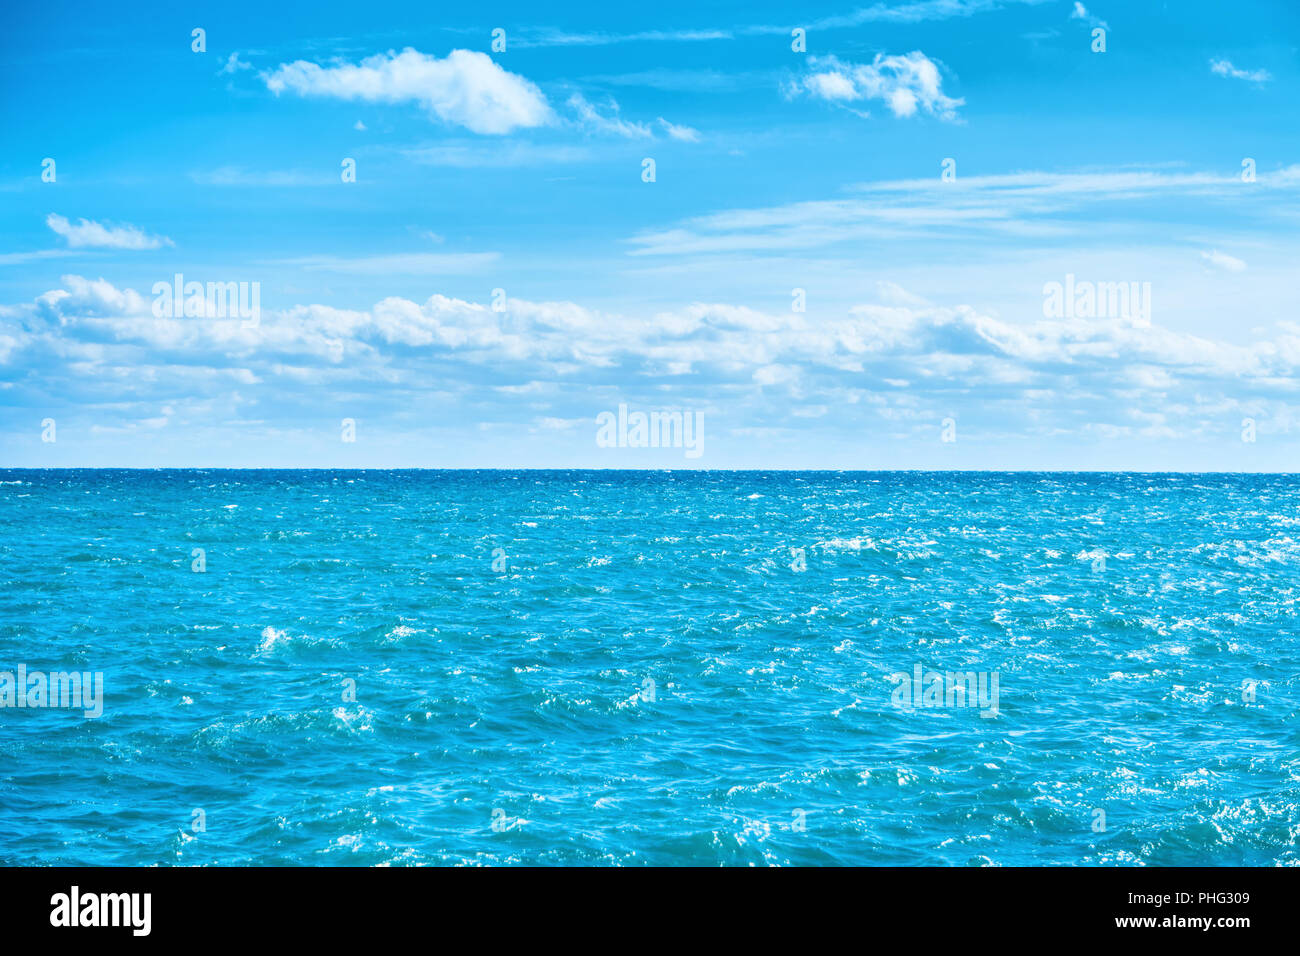 Sea water and blue sky with white clouds Stock Photo